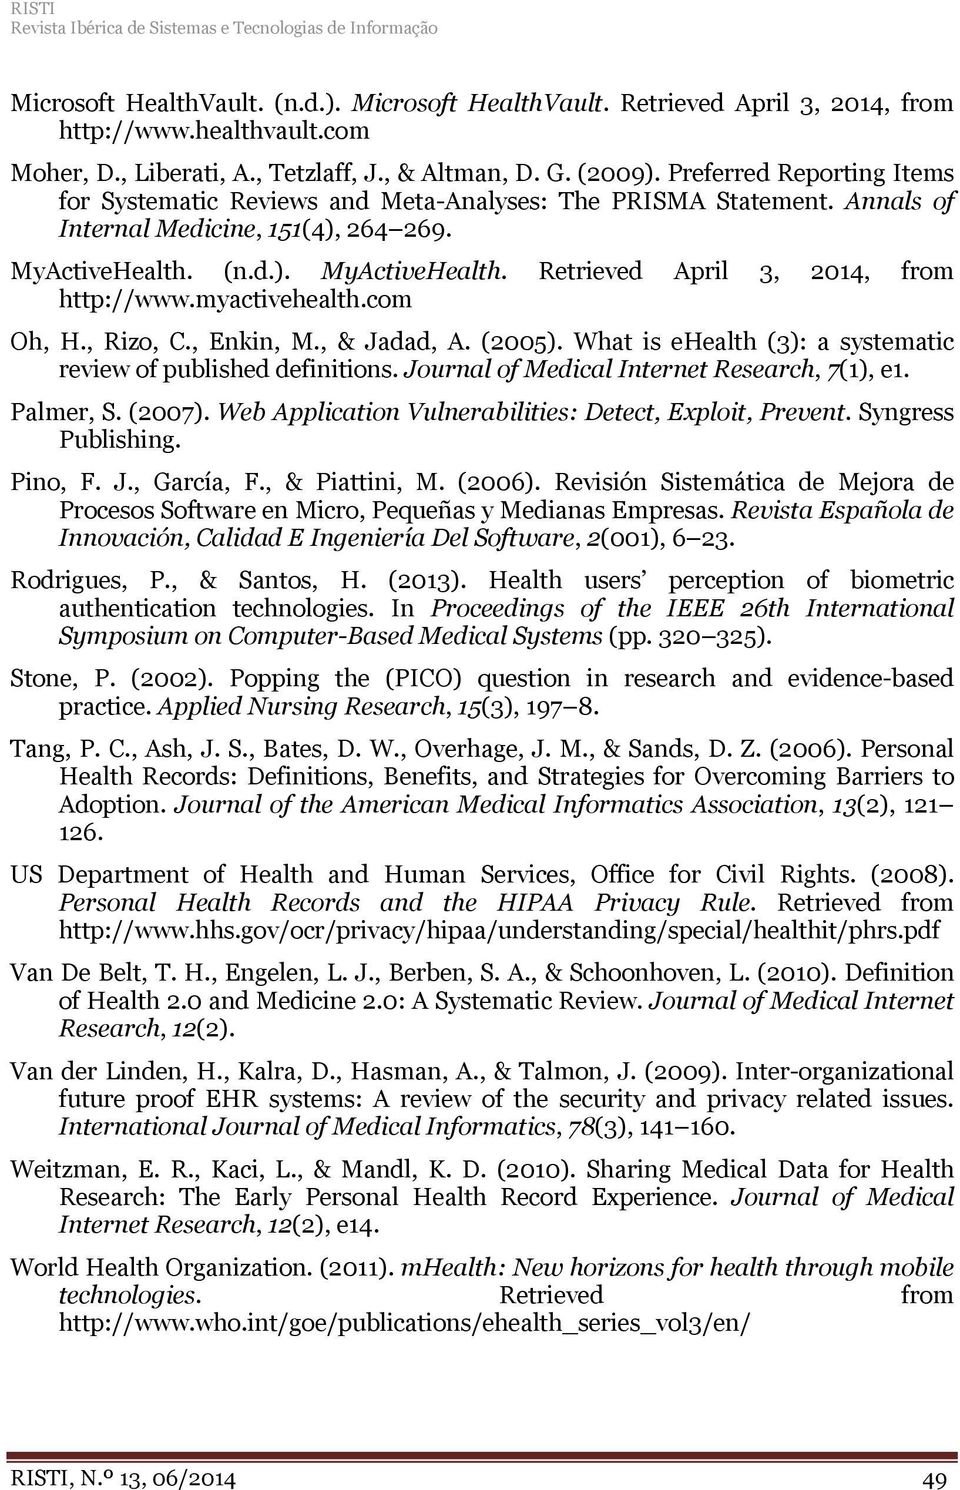 (n.d.). MyActiveHealth. Retrieved April 3, 2014, from http://www.myactivehealth.com Oh, H., Rizo, C., Enkin, M., & Jadad, A. (2005). What is ehealth (3): a systematic review of published definitions.